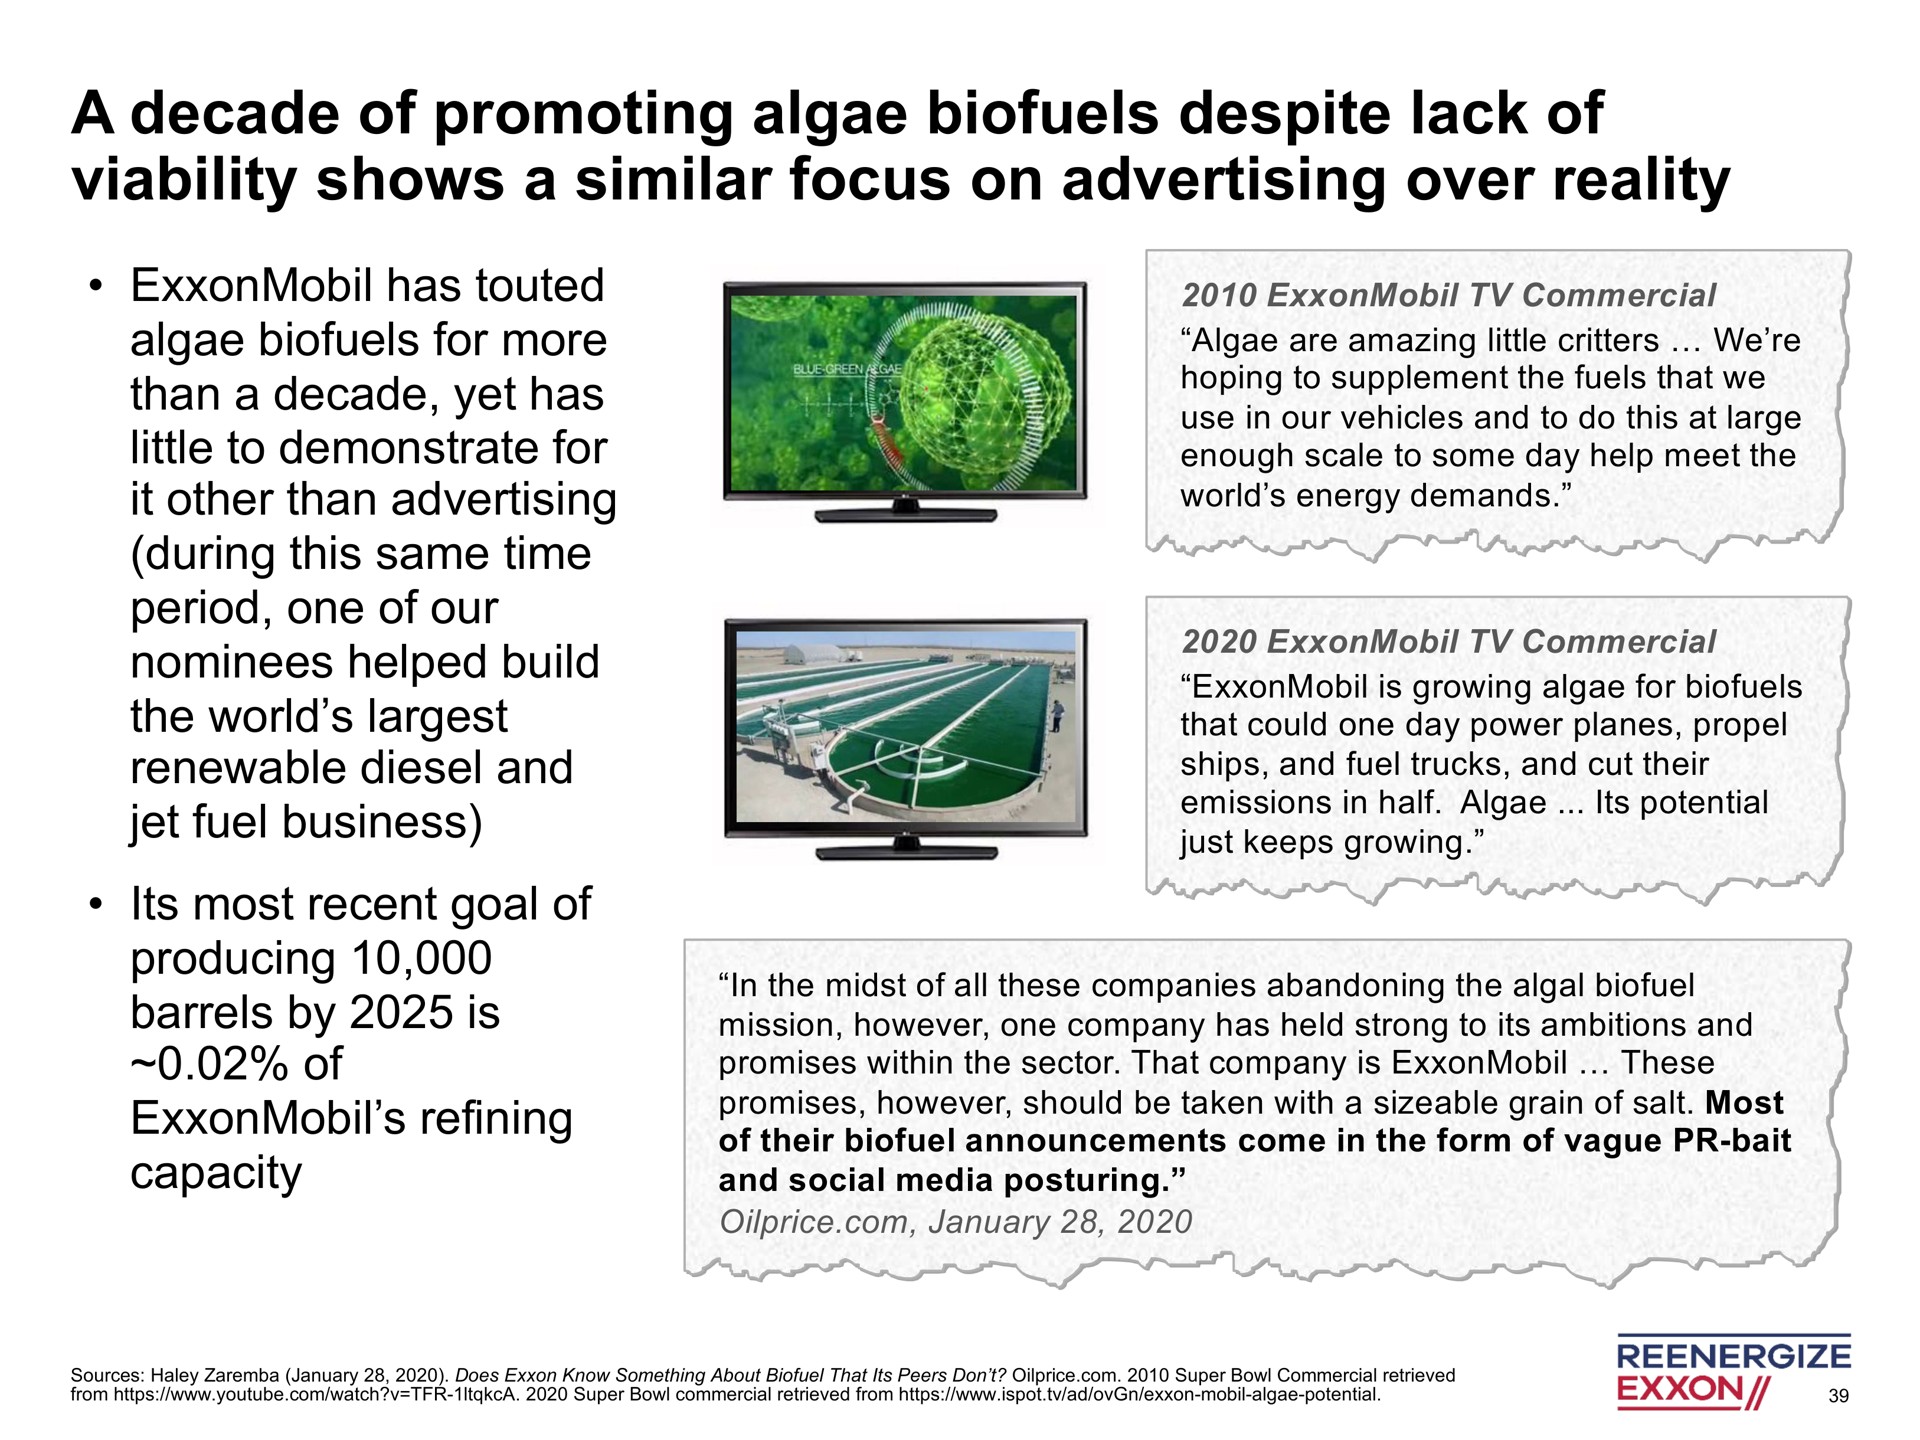 a decade of promoting algae despite lack of viability shows a similar focus on advertising over reality | Engine No. 1